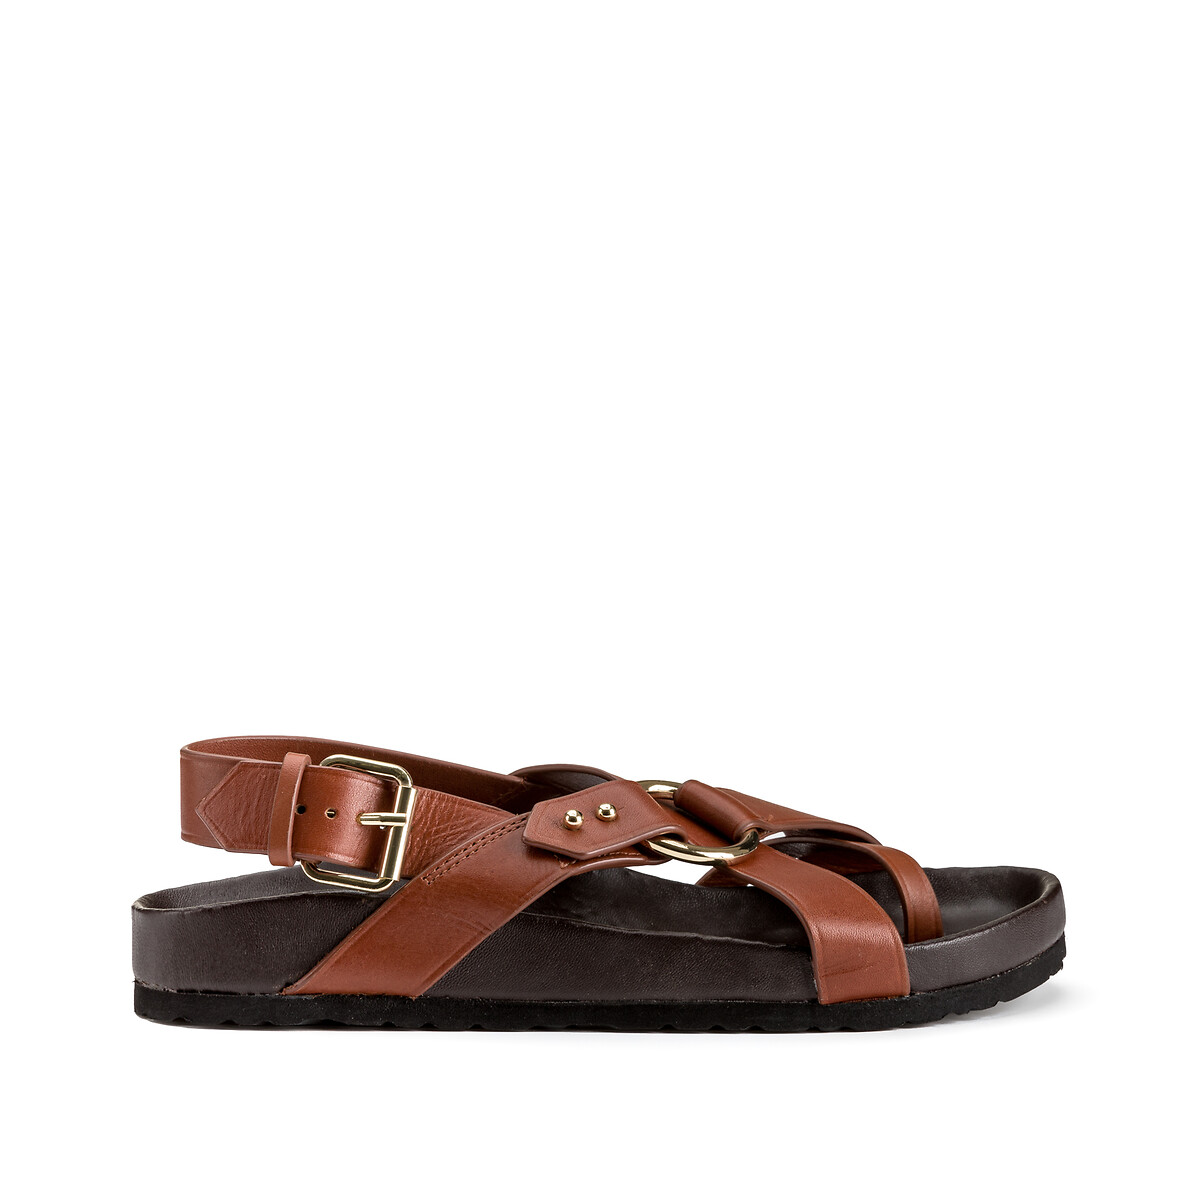 Mexico leather strappy sandals, brown, Soeur | La Redoute